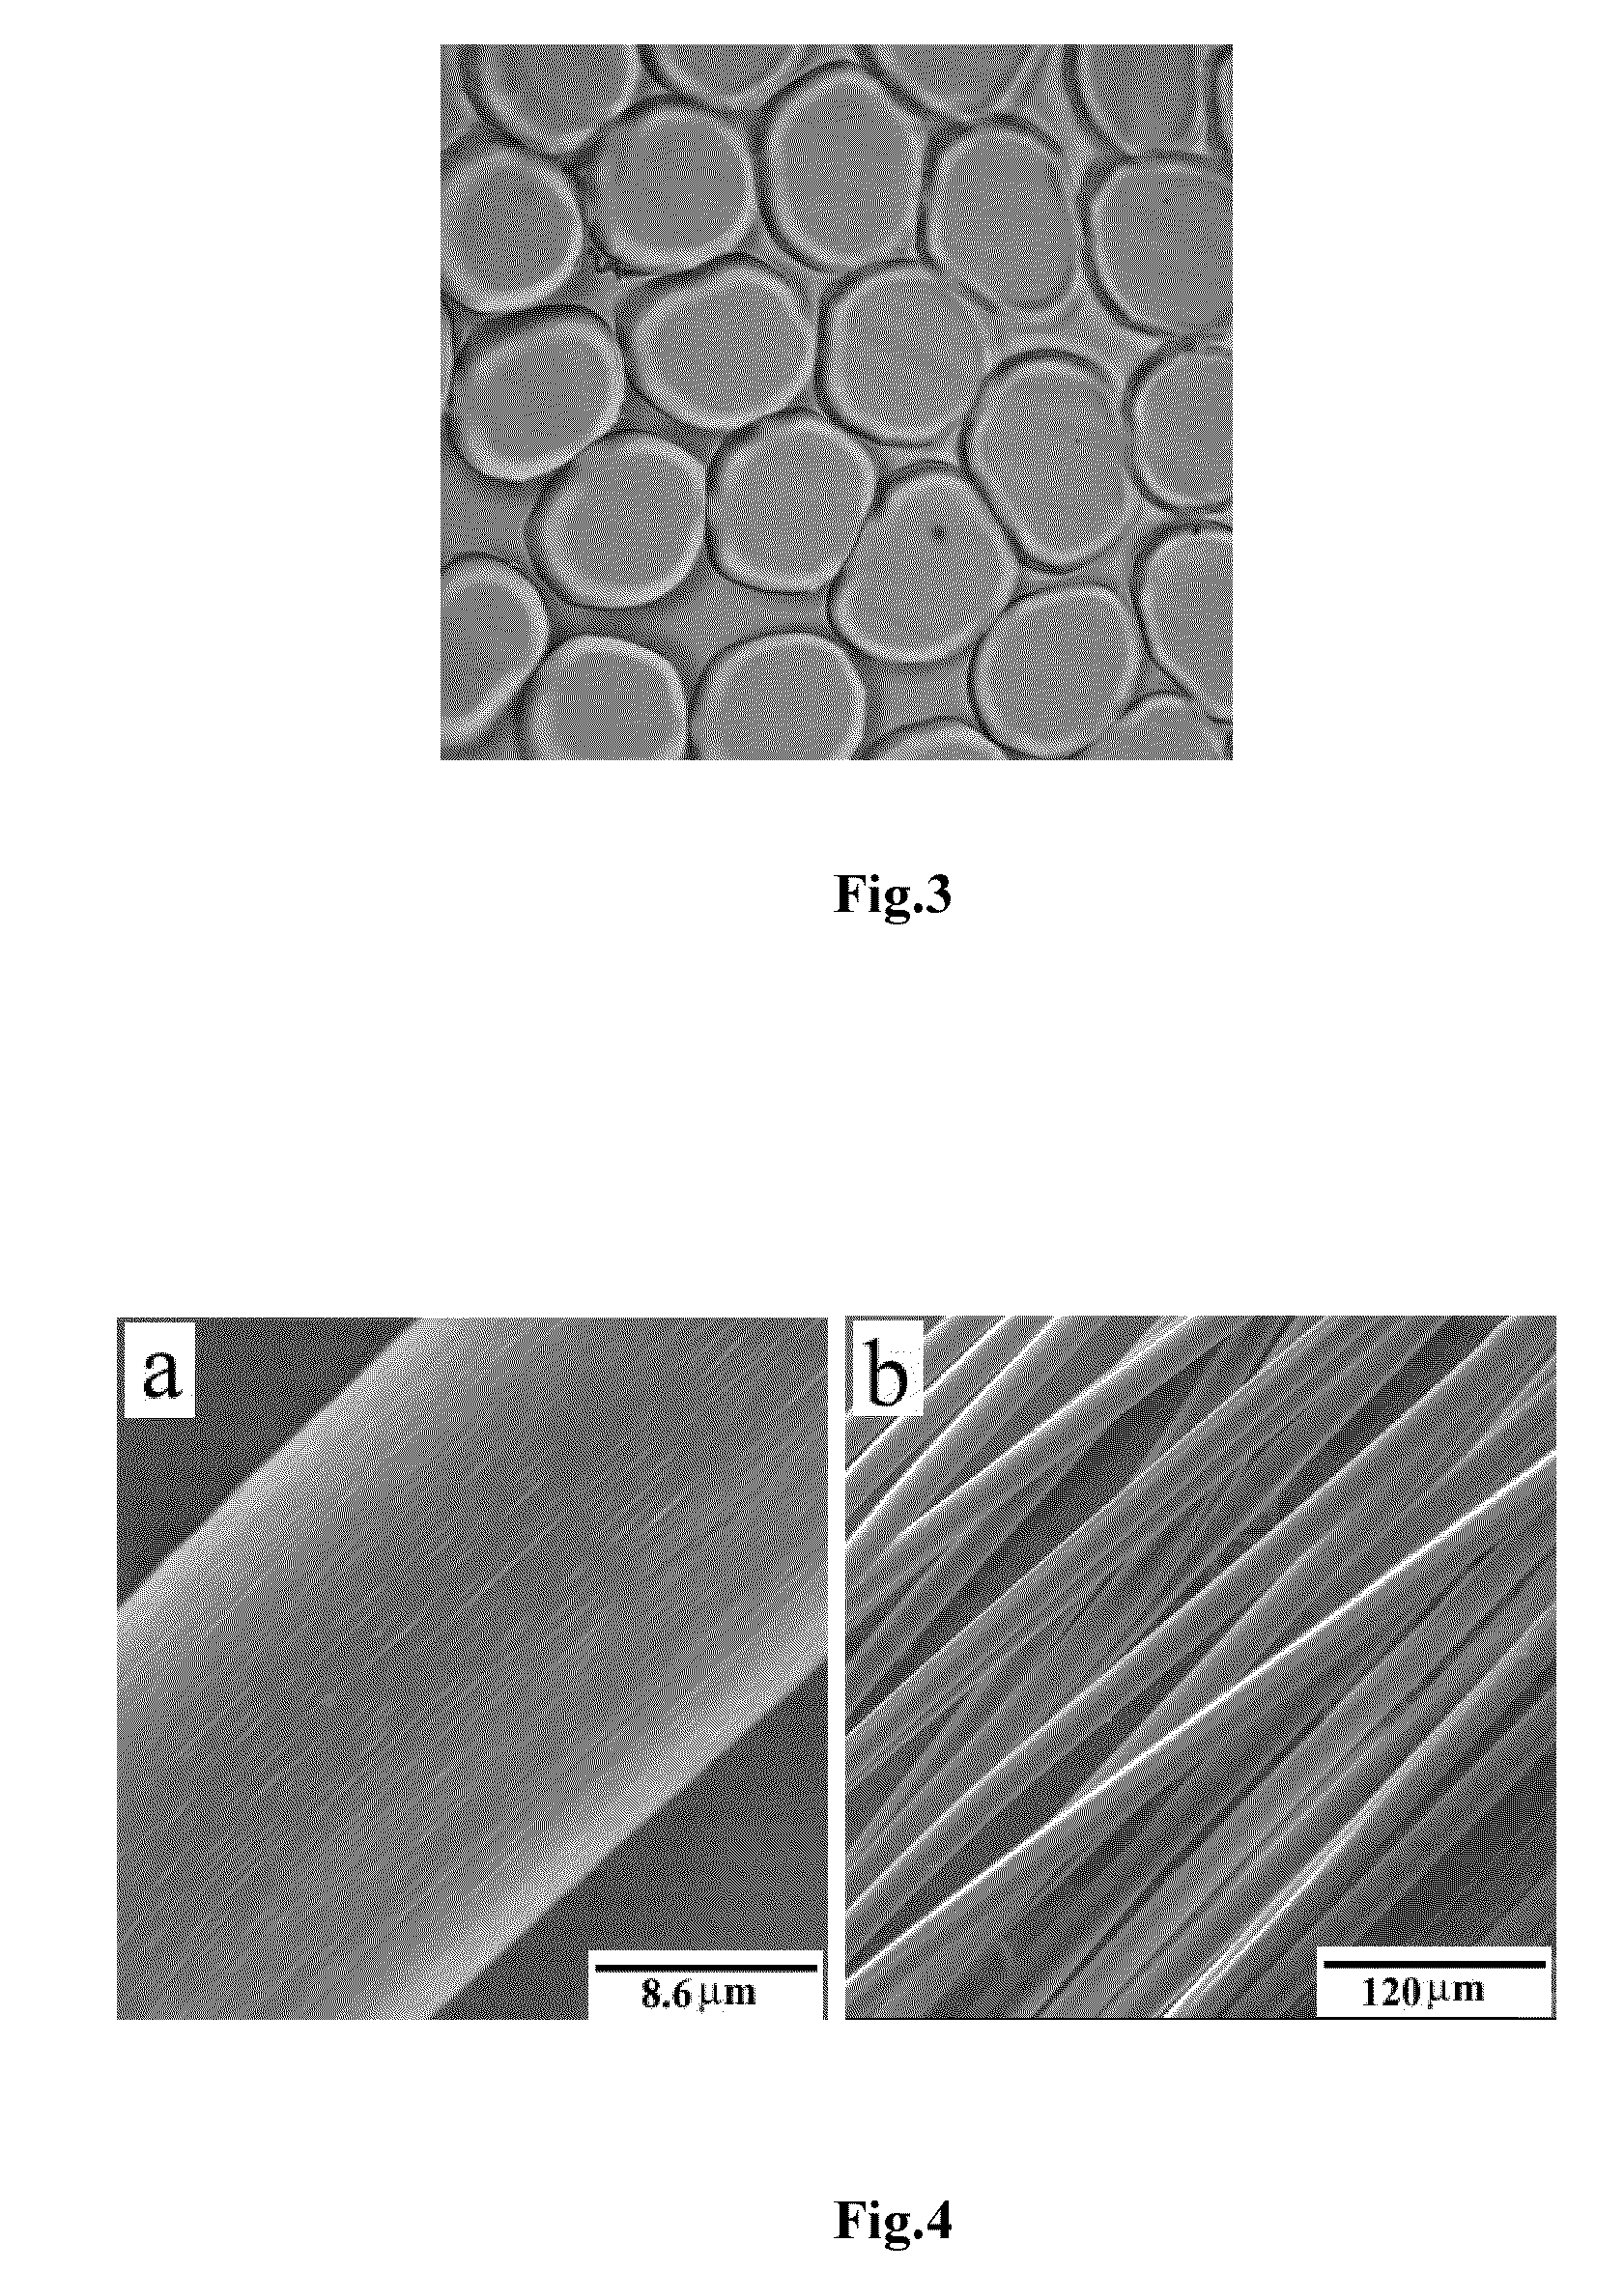 Method for Preparing Regenerated Cellulose Fiber by Two-Step Coagulating Bath Process